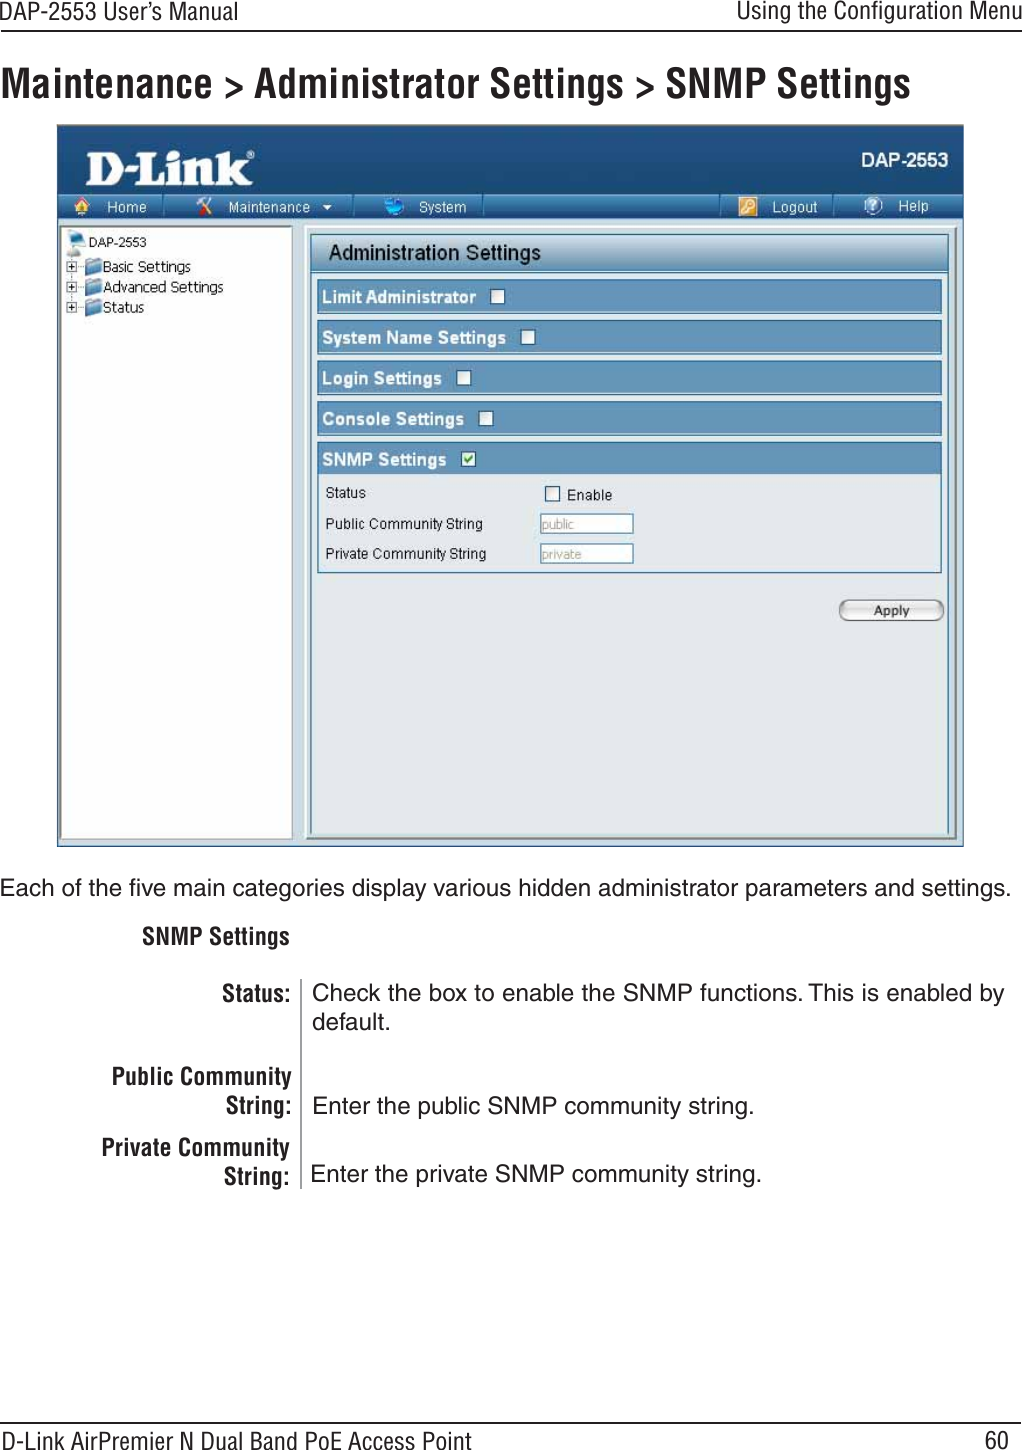 60DAP-2553 User’s ManualD-Link AirPremier N Dual Band PoE Access PointSNMP SettingsPublic Community String: Enter the public SNMP community string.Status: Check the box to enable the SNMP functions. This is enabled bydefault.Private Community String: Enter the private SNMP community string.Conﬁrm New Password:Conﬁrm by re-entering your new password here.Maintenance &gt; Administrator Settings &gt; SNMP SettingsEach of the ﬁve main categories display various hidden administrator parameters and settings.Using the Conﬁguration Menu